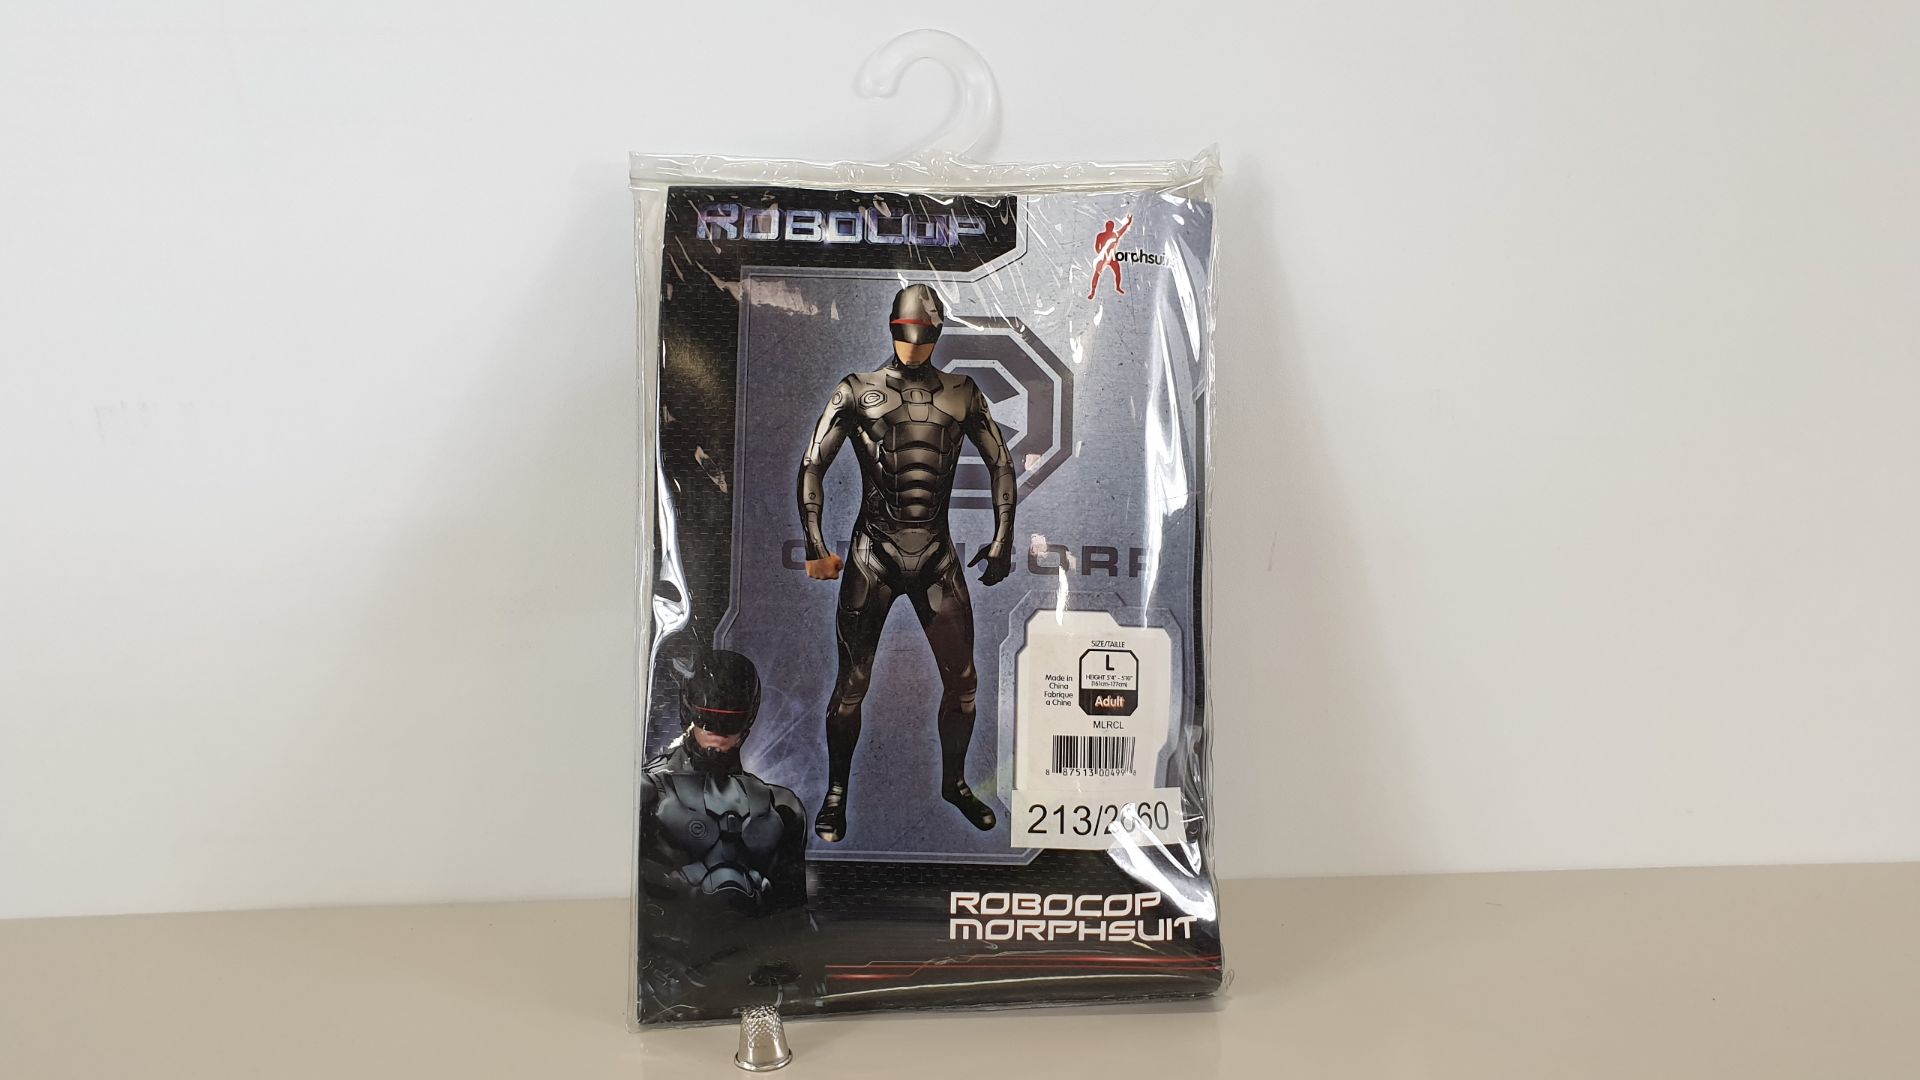 10 X ROBOCOP MORPHSUITS - SIZE LARGE - (BRAND NEW IN HANGER PACKS)